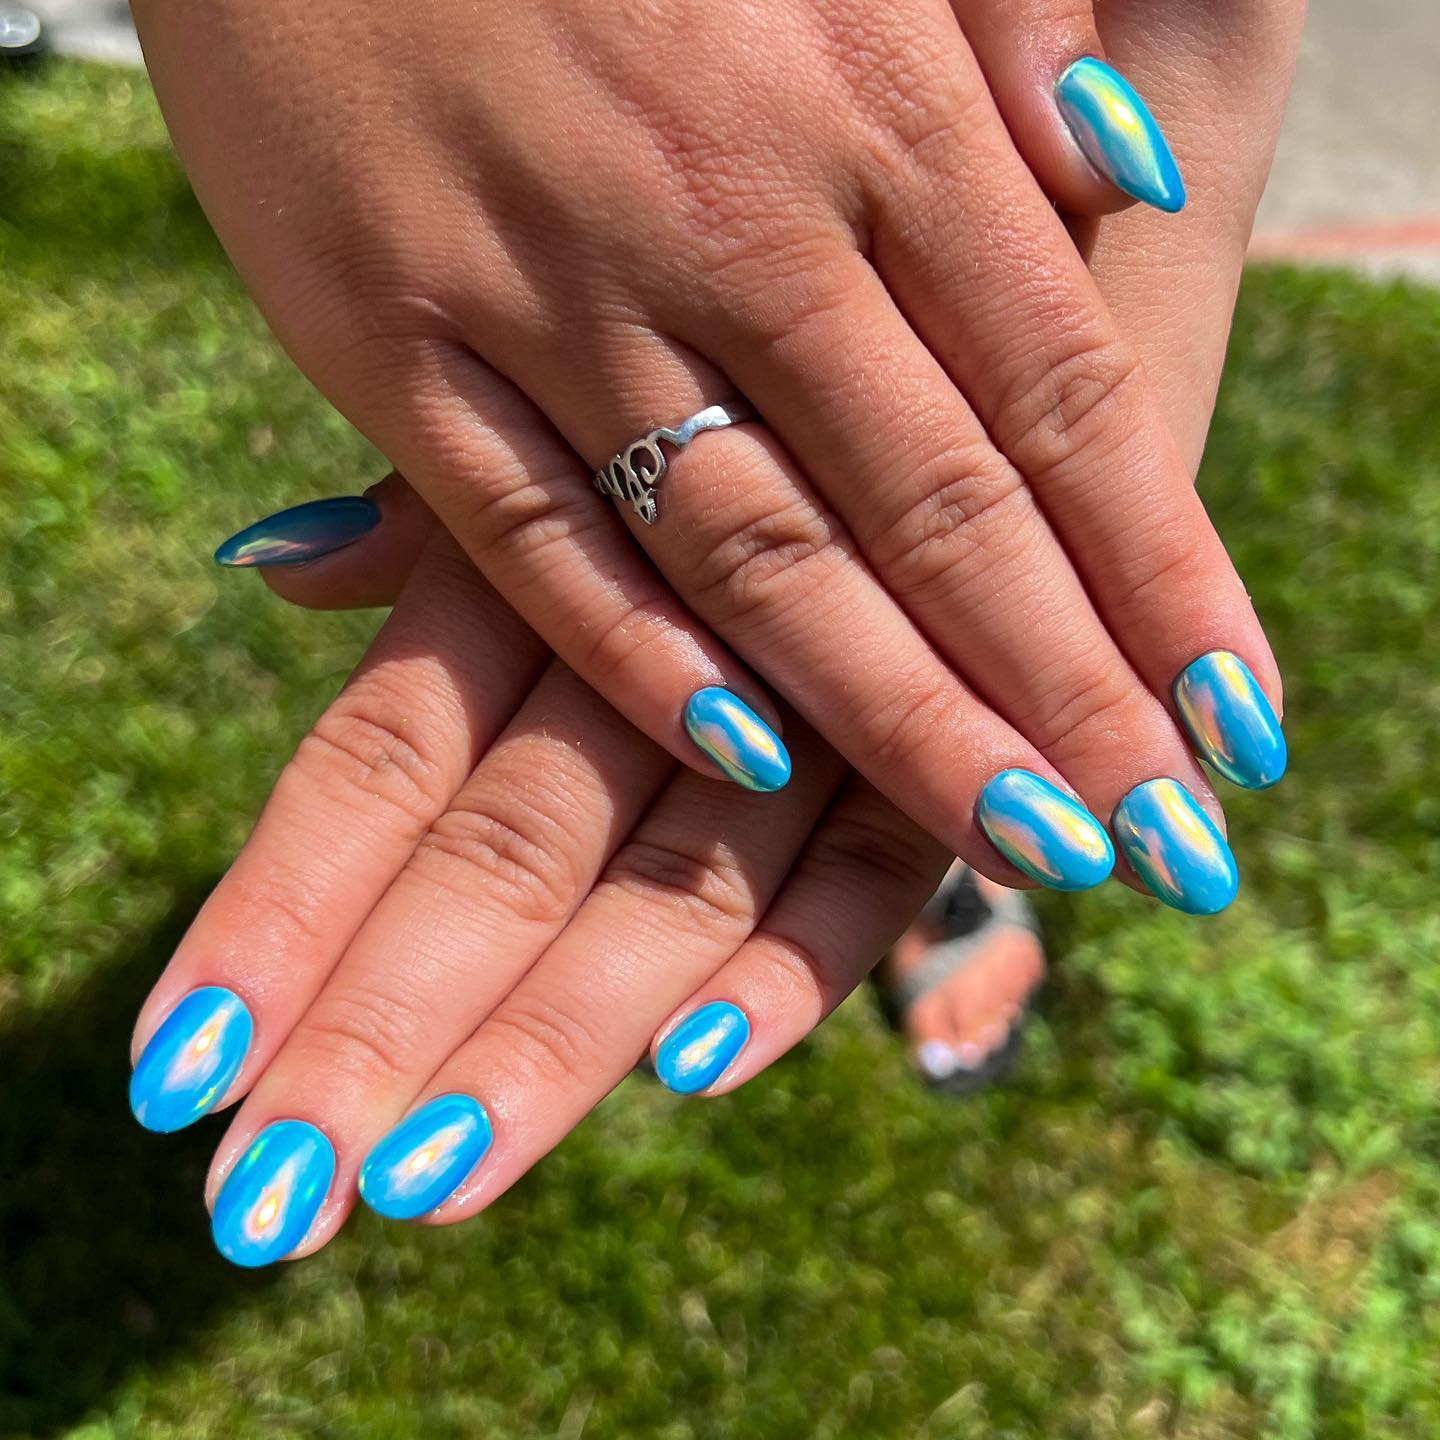 To bring the tranquility to your nails, is there a better color than a bright blue? Well, try this chrome nails, then.